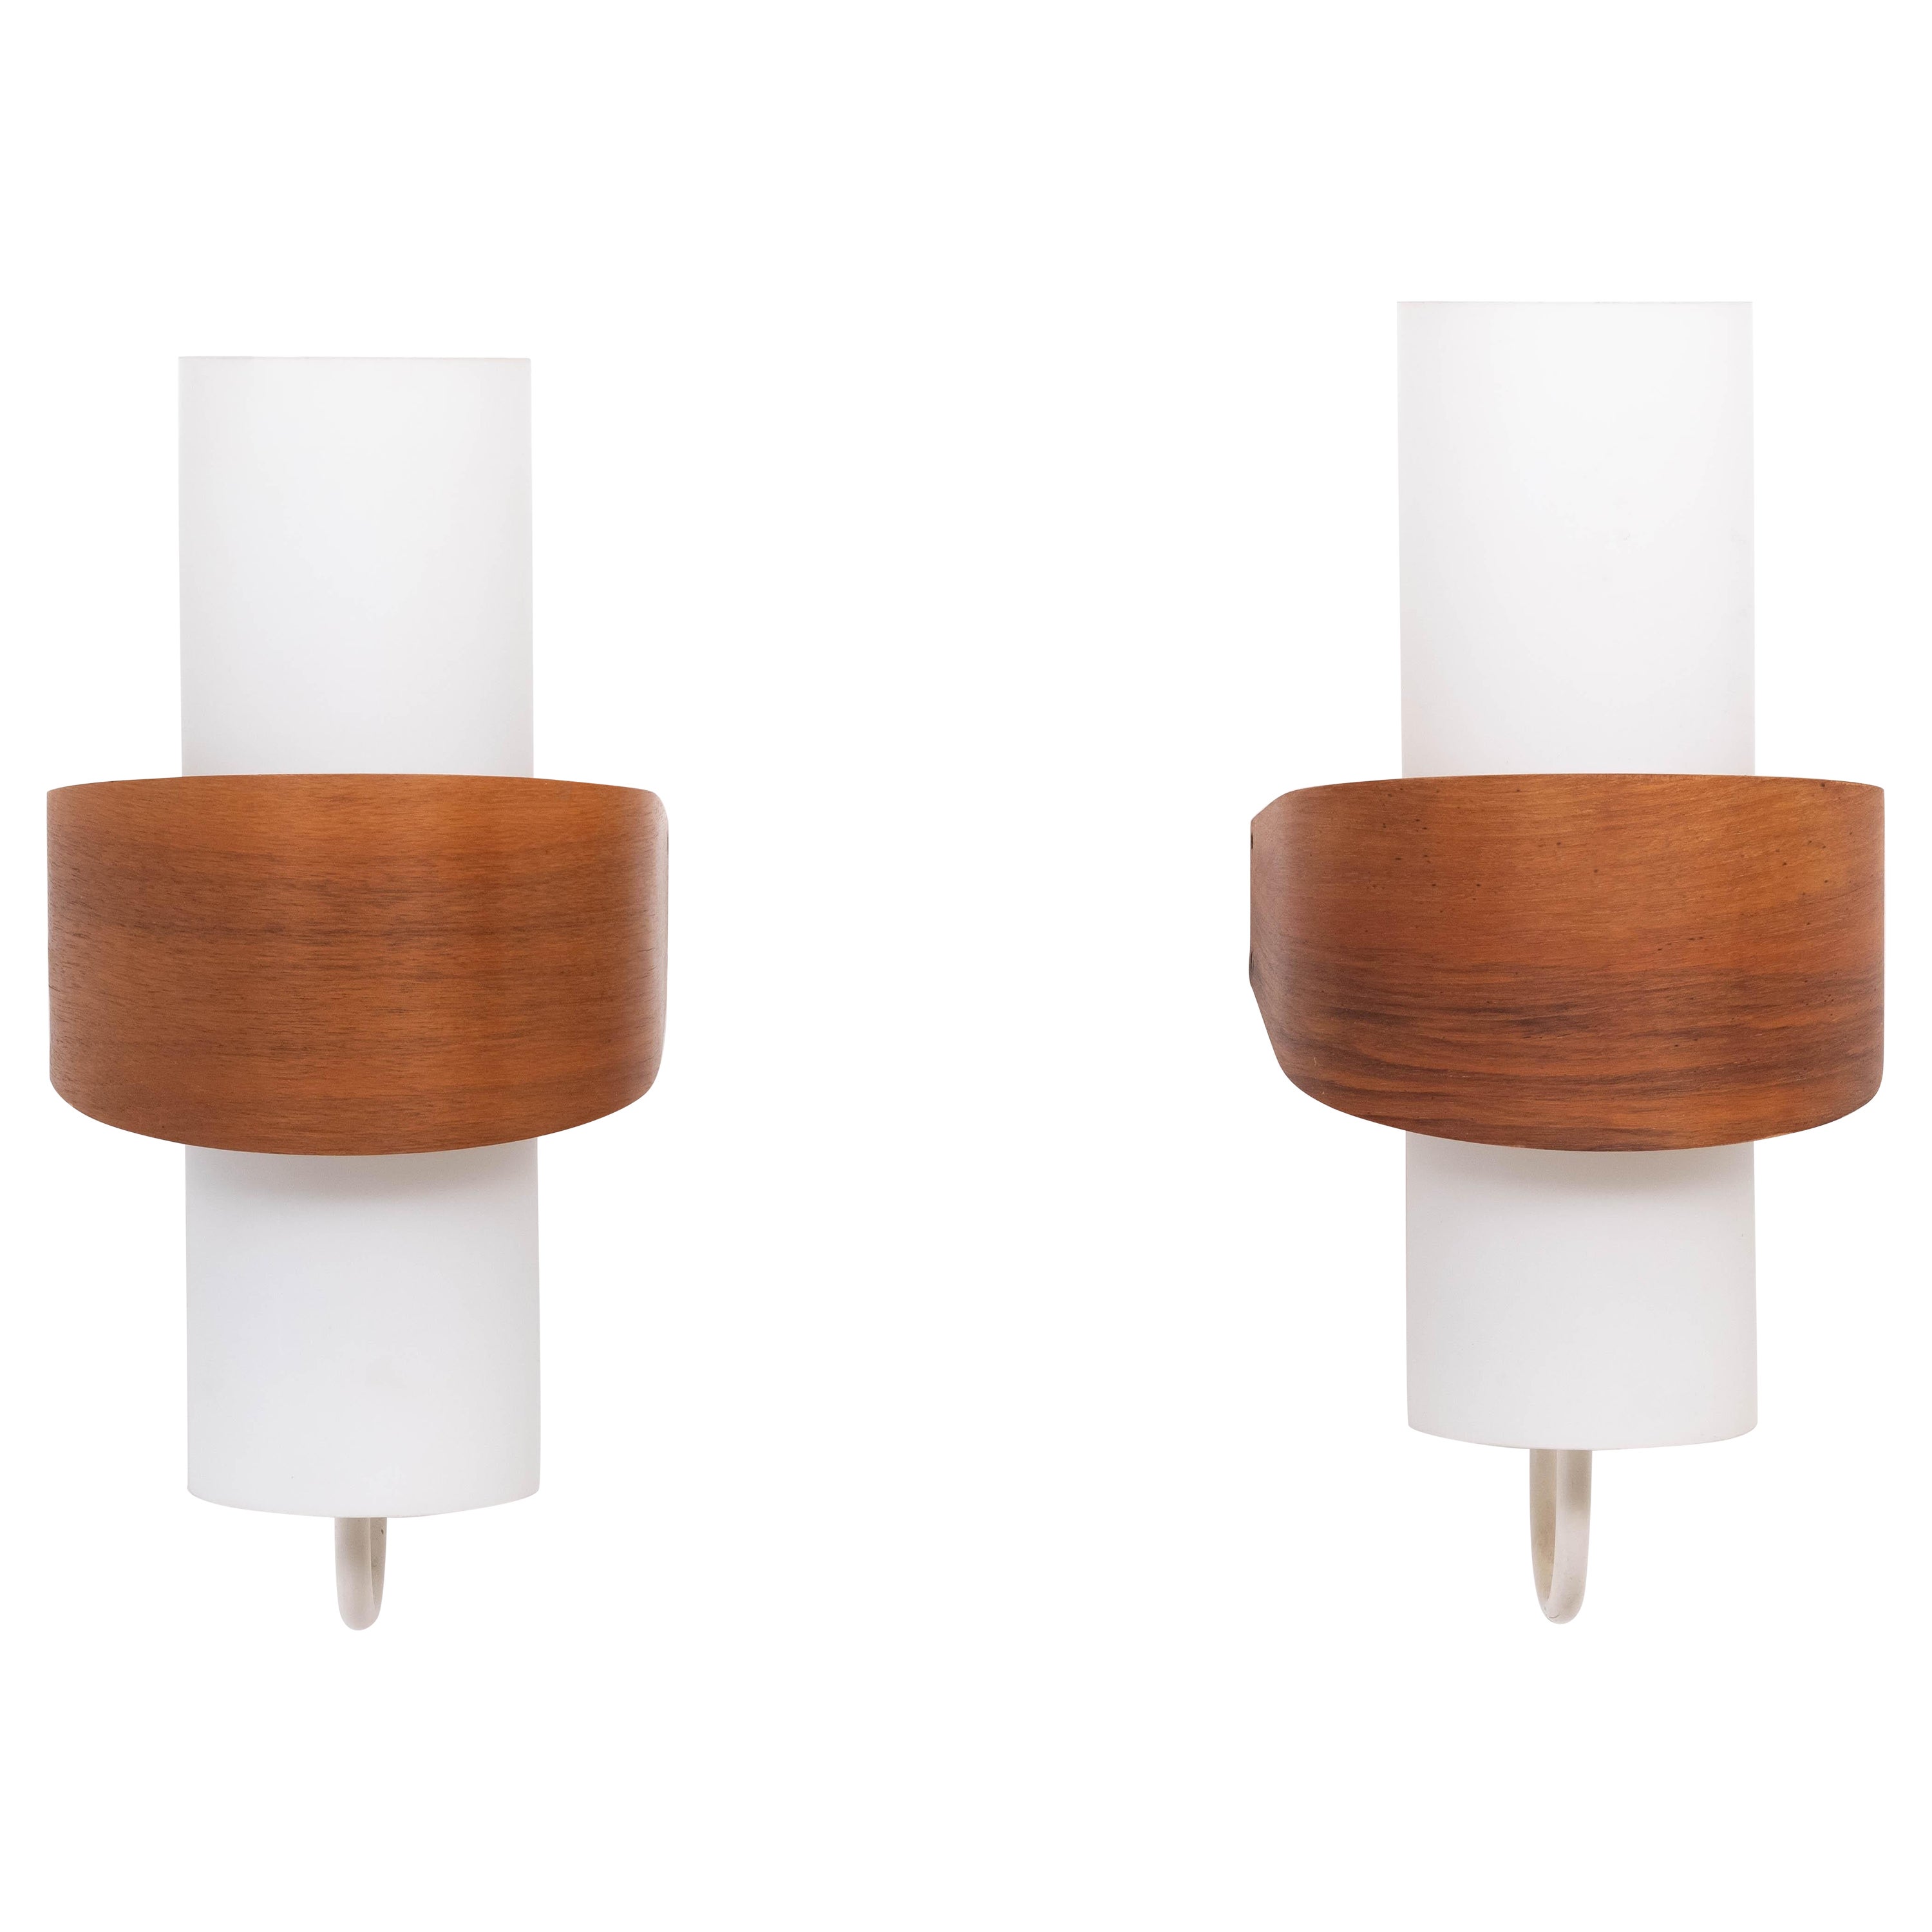 Love these wonderful wall lights. Design Louis Kalff Produced by Philips Holland 1960s Model NX40
Satin finish Glass tubes, surrounded by a Teak Plywood shade, on a metal armature.
Gives a very nice warm light when lid. Good size. and good